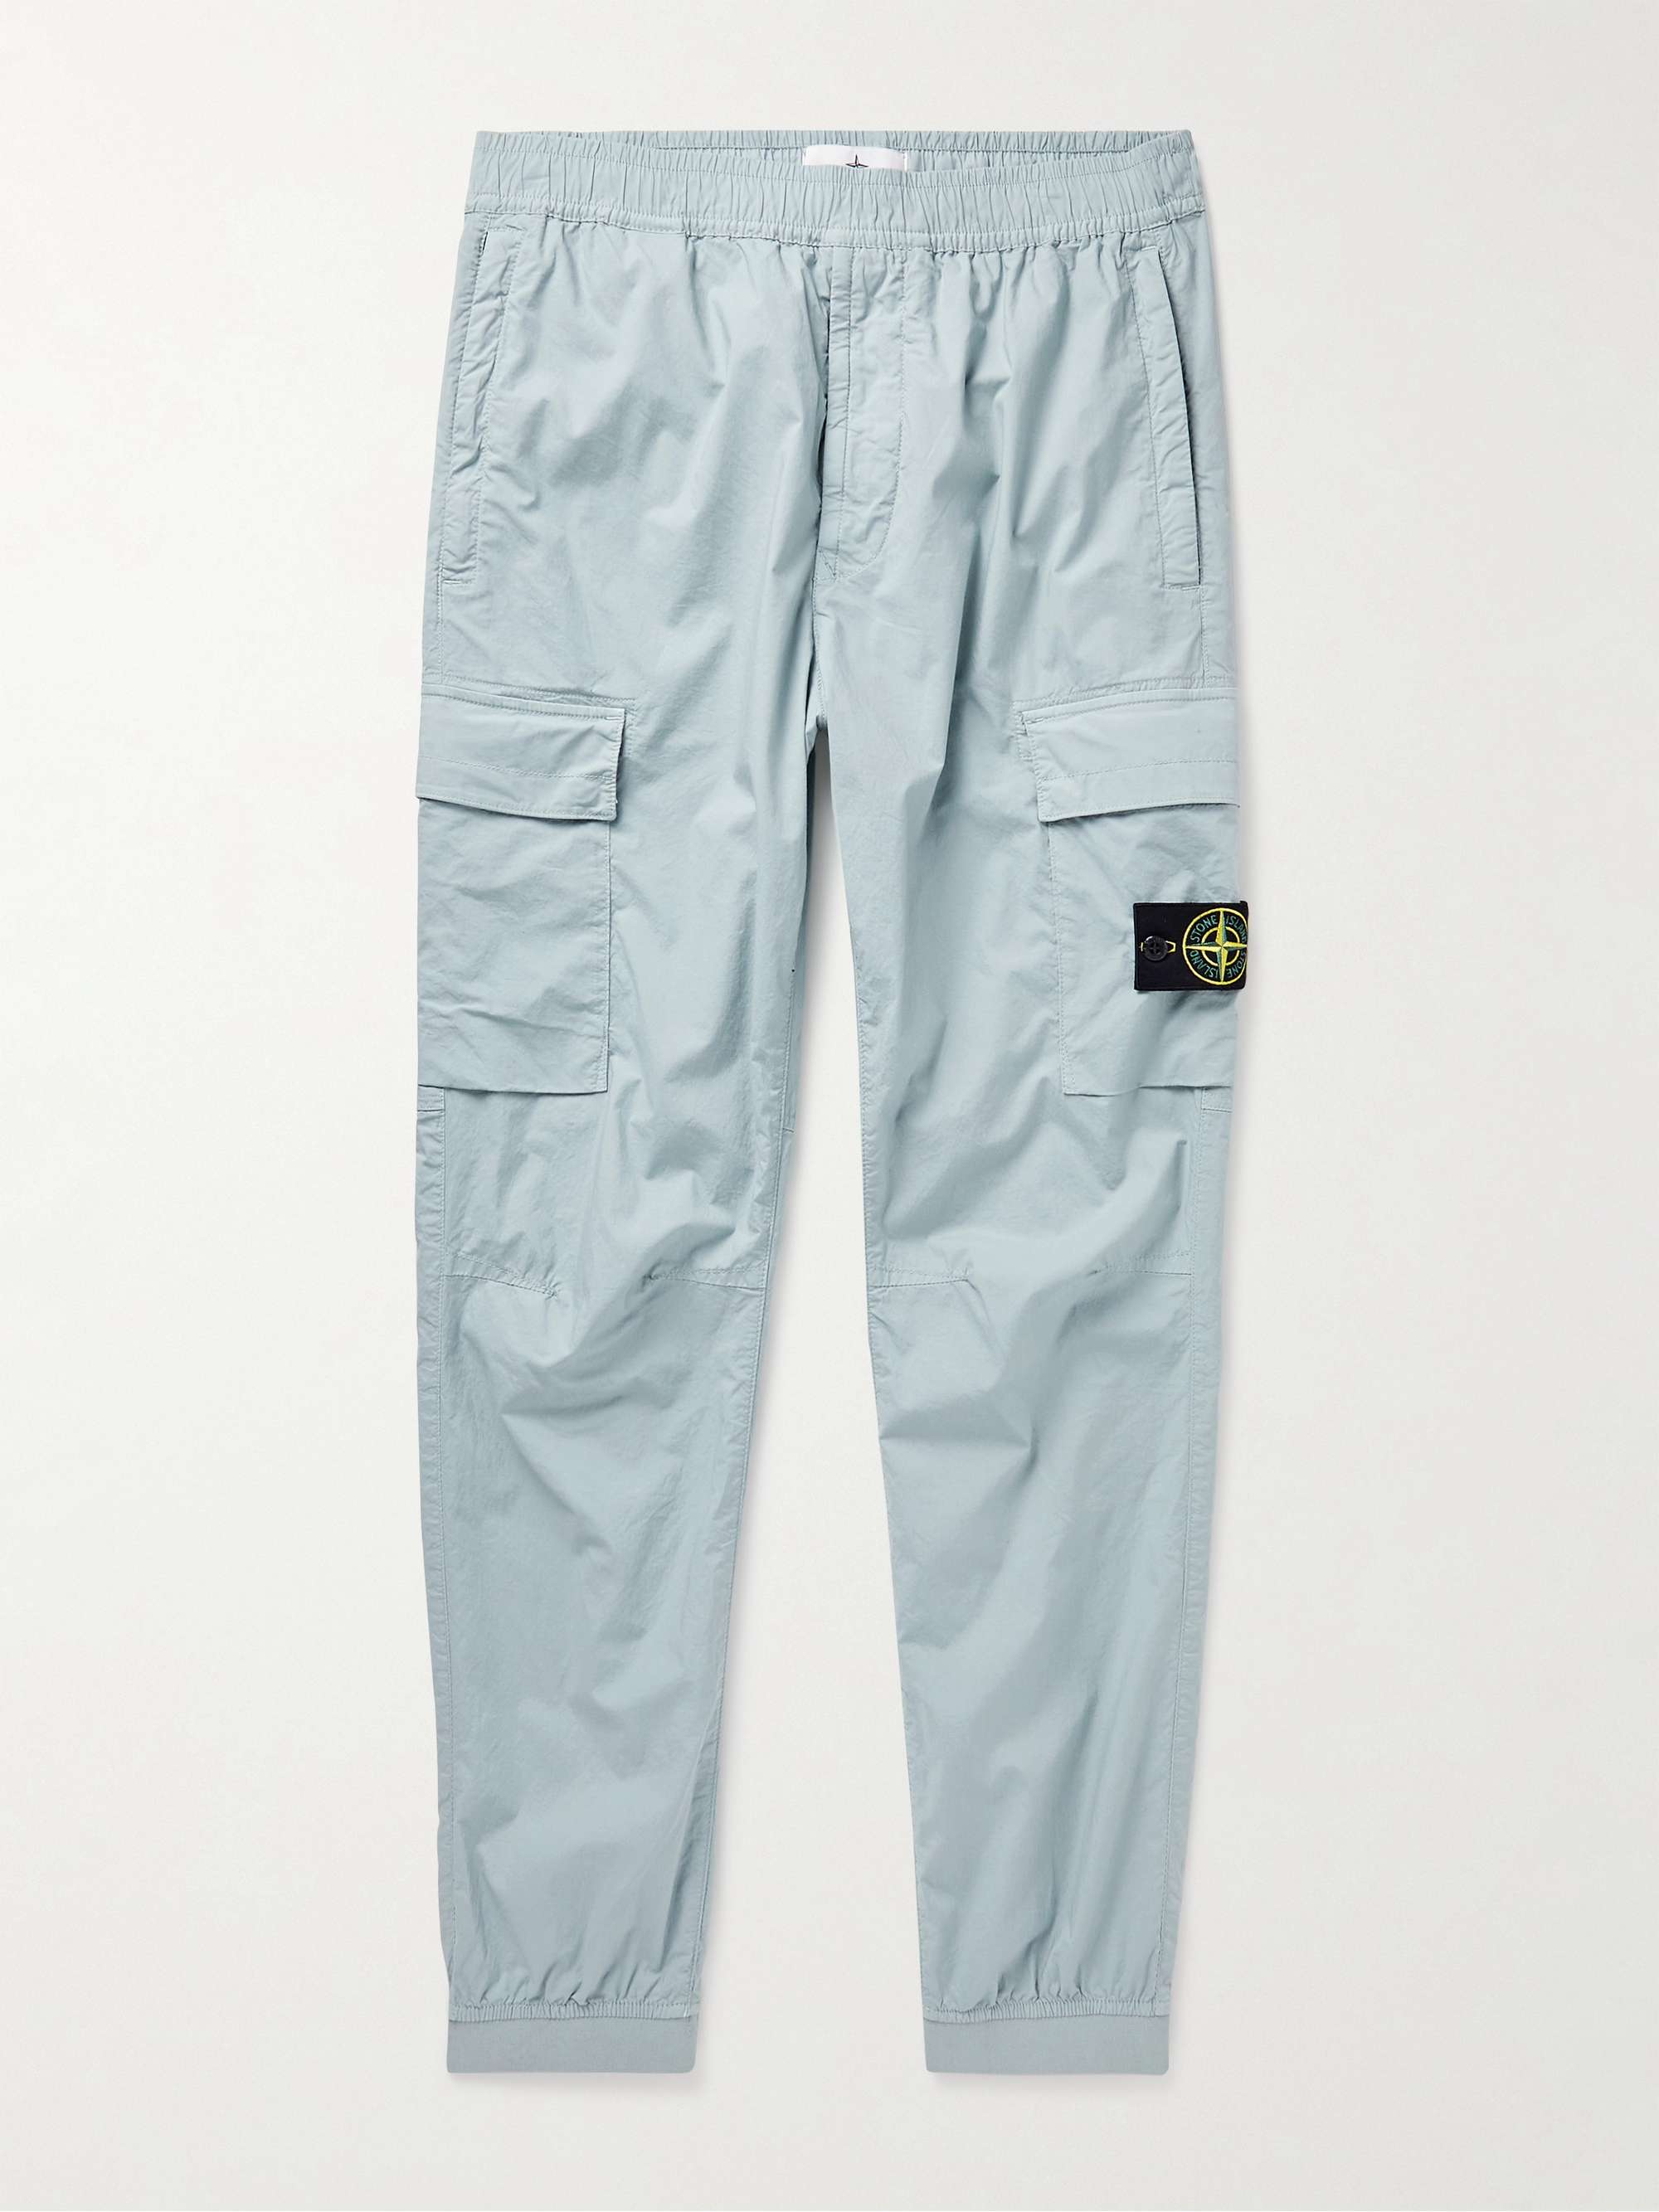 STONE ISLAND Tapered Garment-Dyed Stretch-Cotton Cargo Trousers | MR PORTER